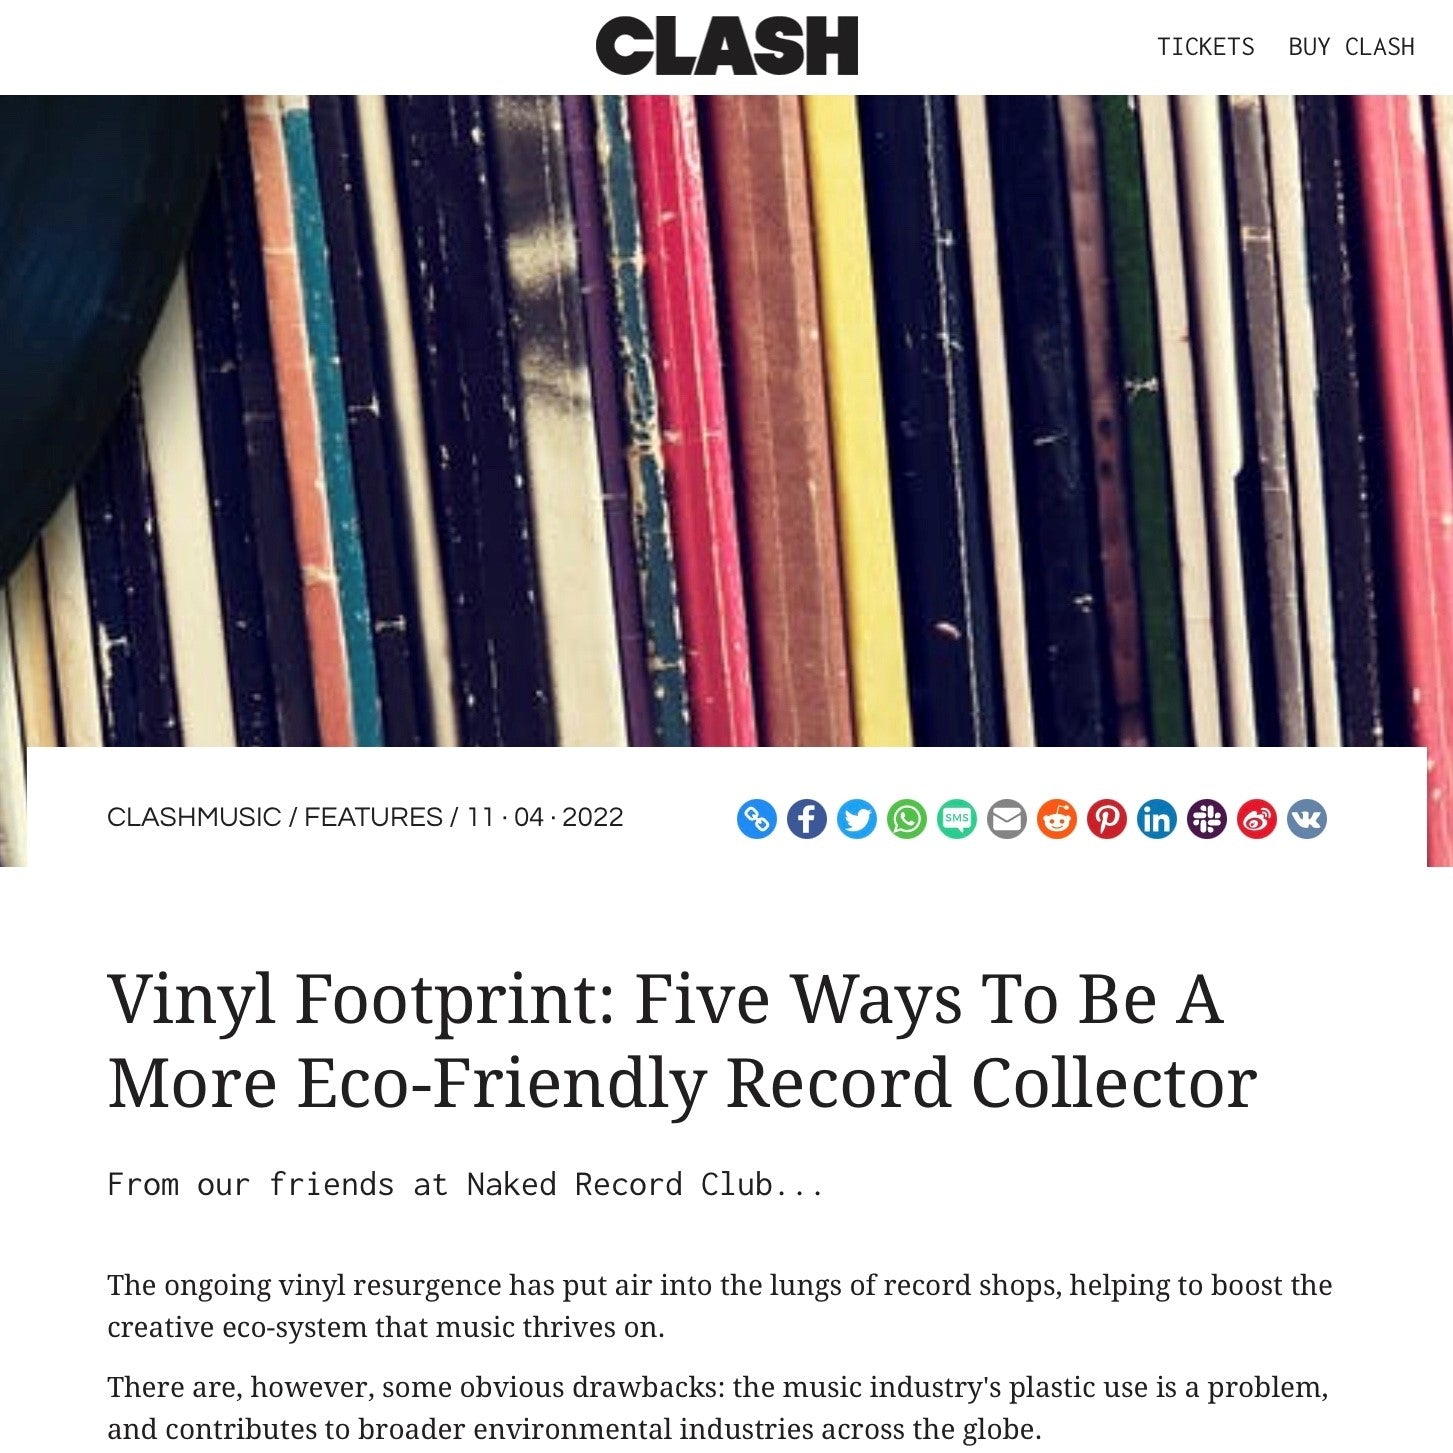 NAKED in CLASH Magazine: 5 Ways To Be A More Eco-Friendly Record Collector